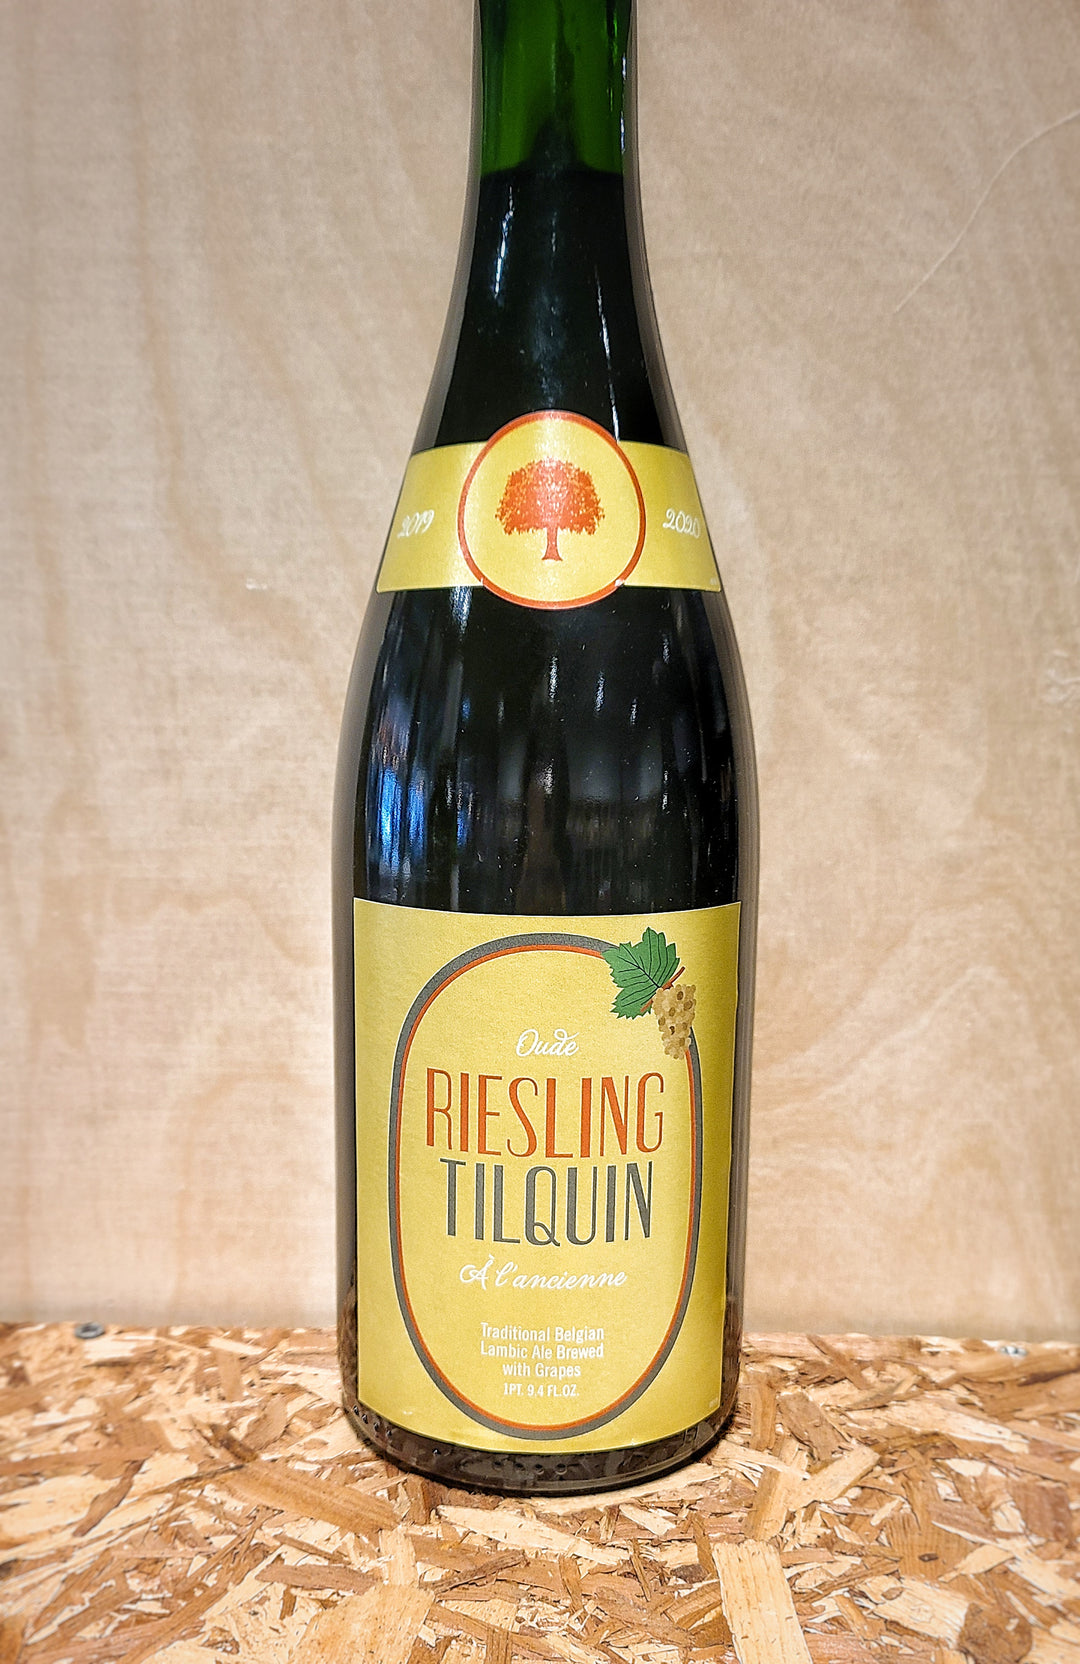 Oude Riesling Tilquin À l'ancienne Traditional Belgian Ale brewed with Riesling Grapes (Belgium)